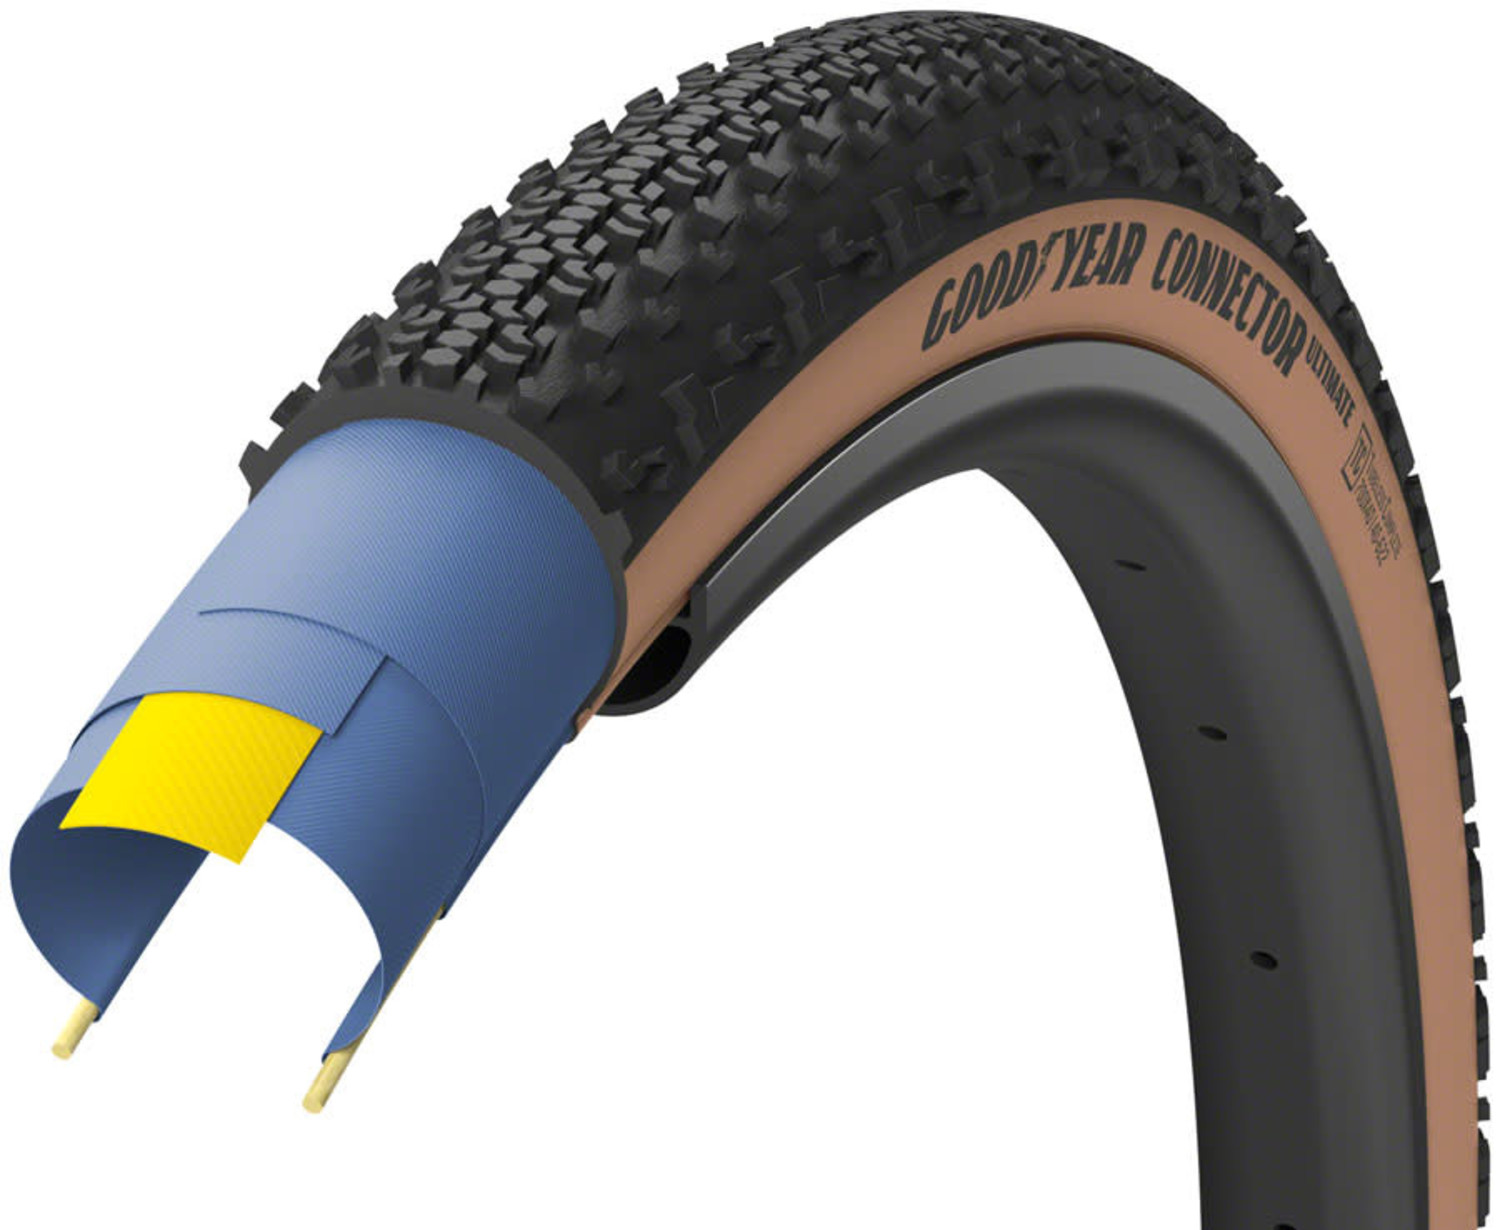 Goodyear Connector Ultimate TL